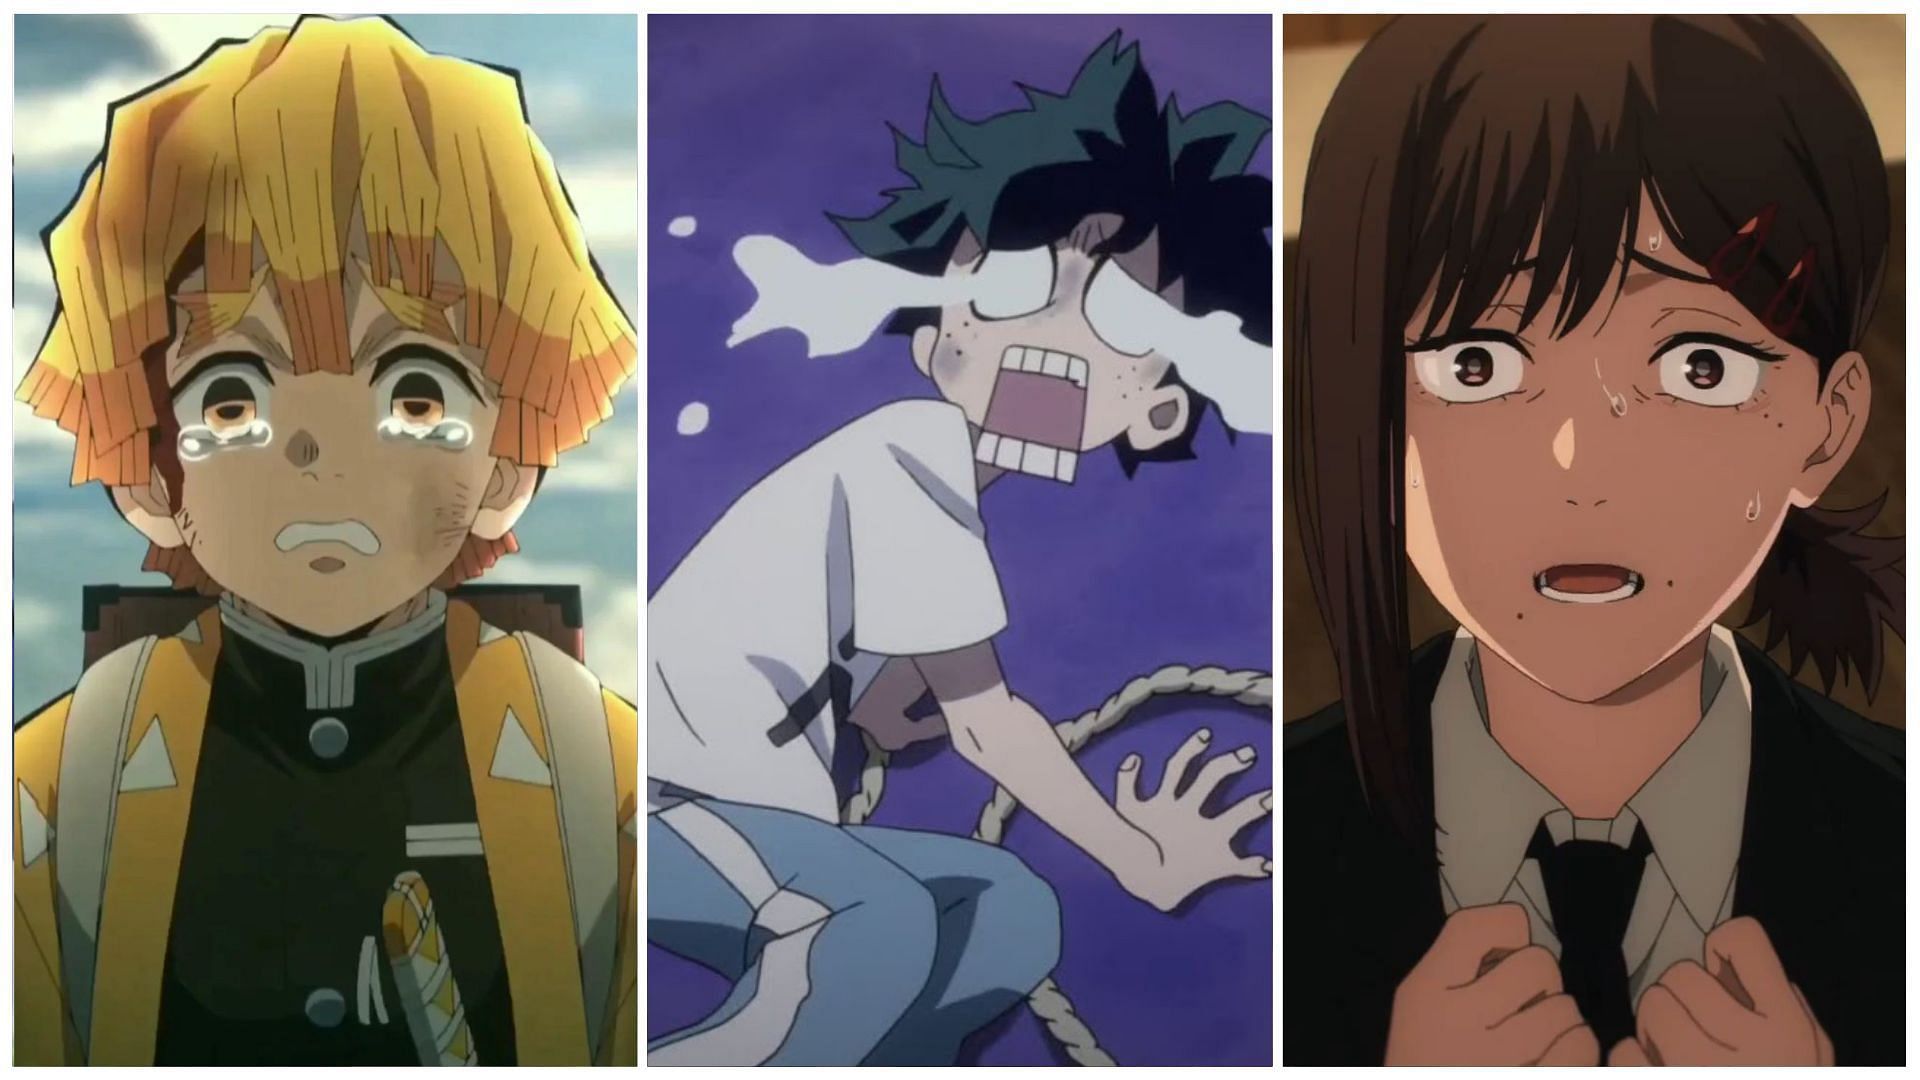 10 Hilarious Comedy Anime Series To Cure Depression